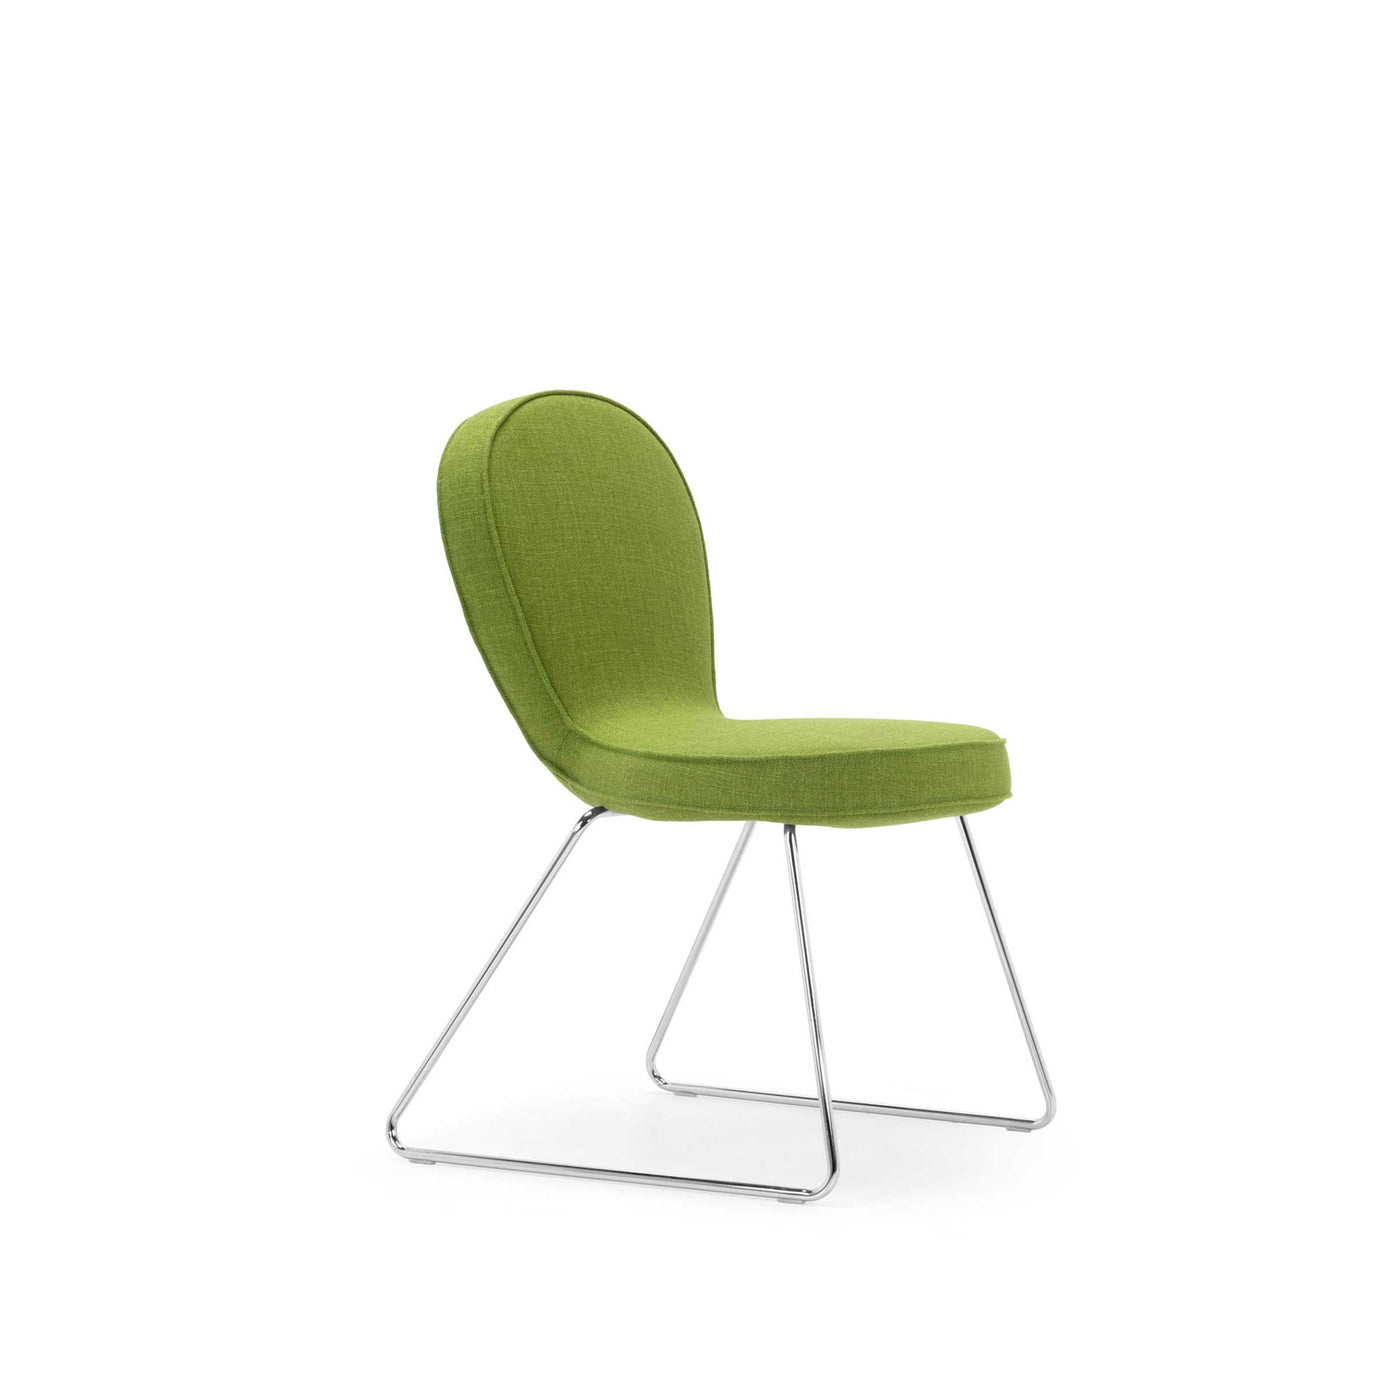 Chair B4 by Simone Micheli for Adrenalina 02